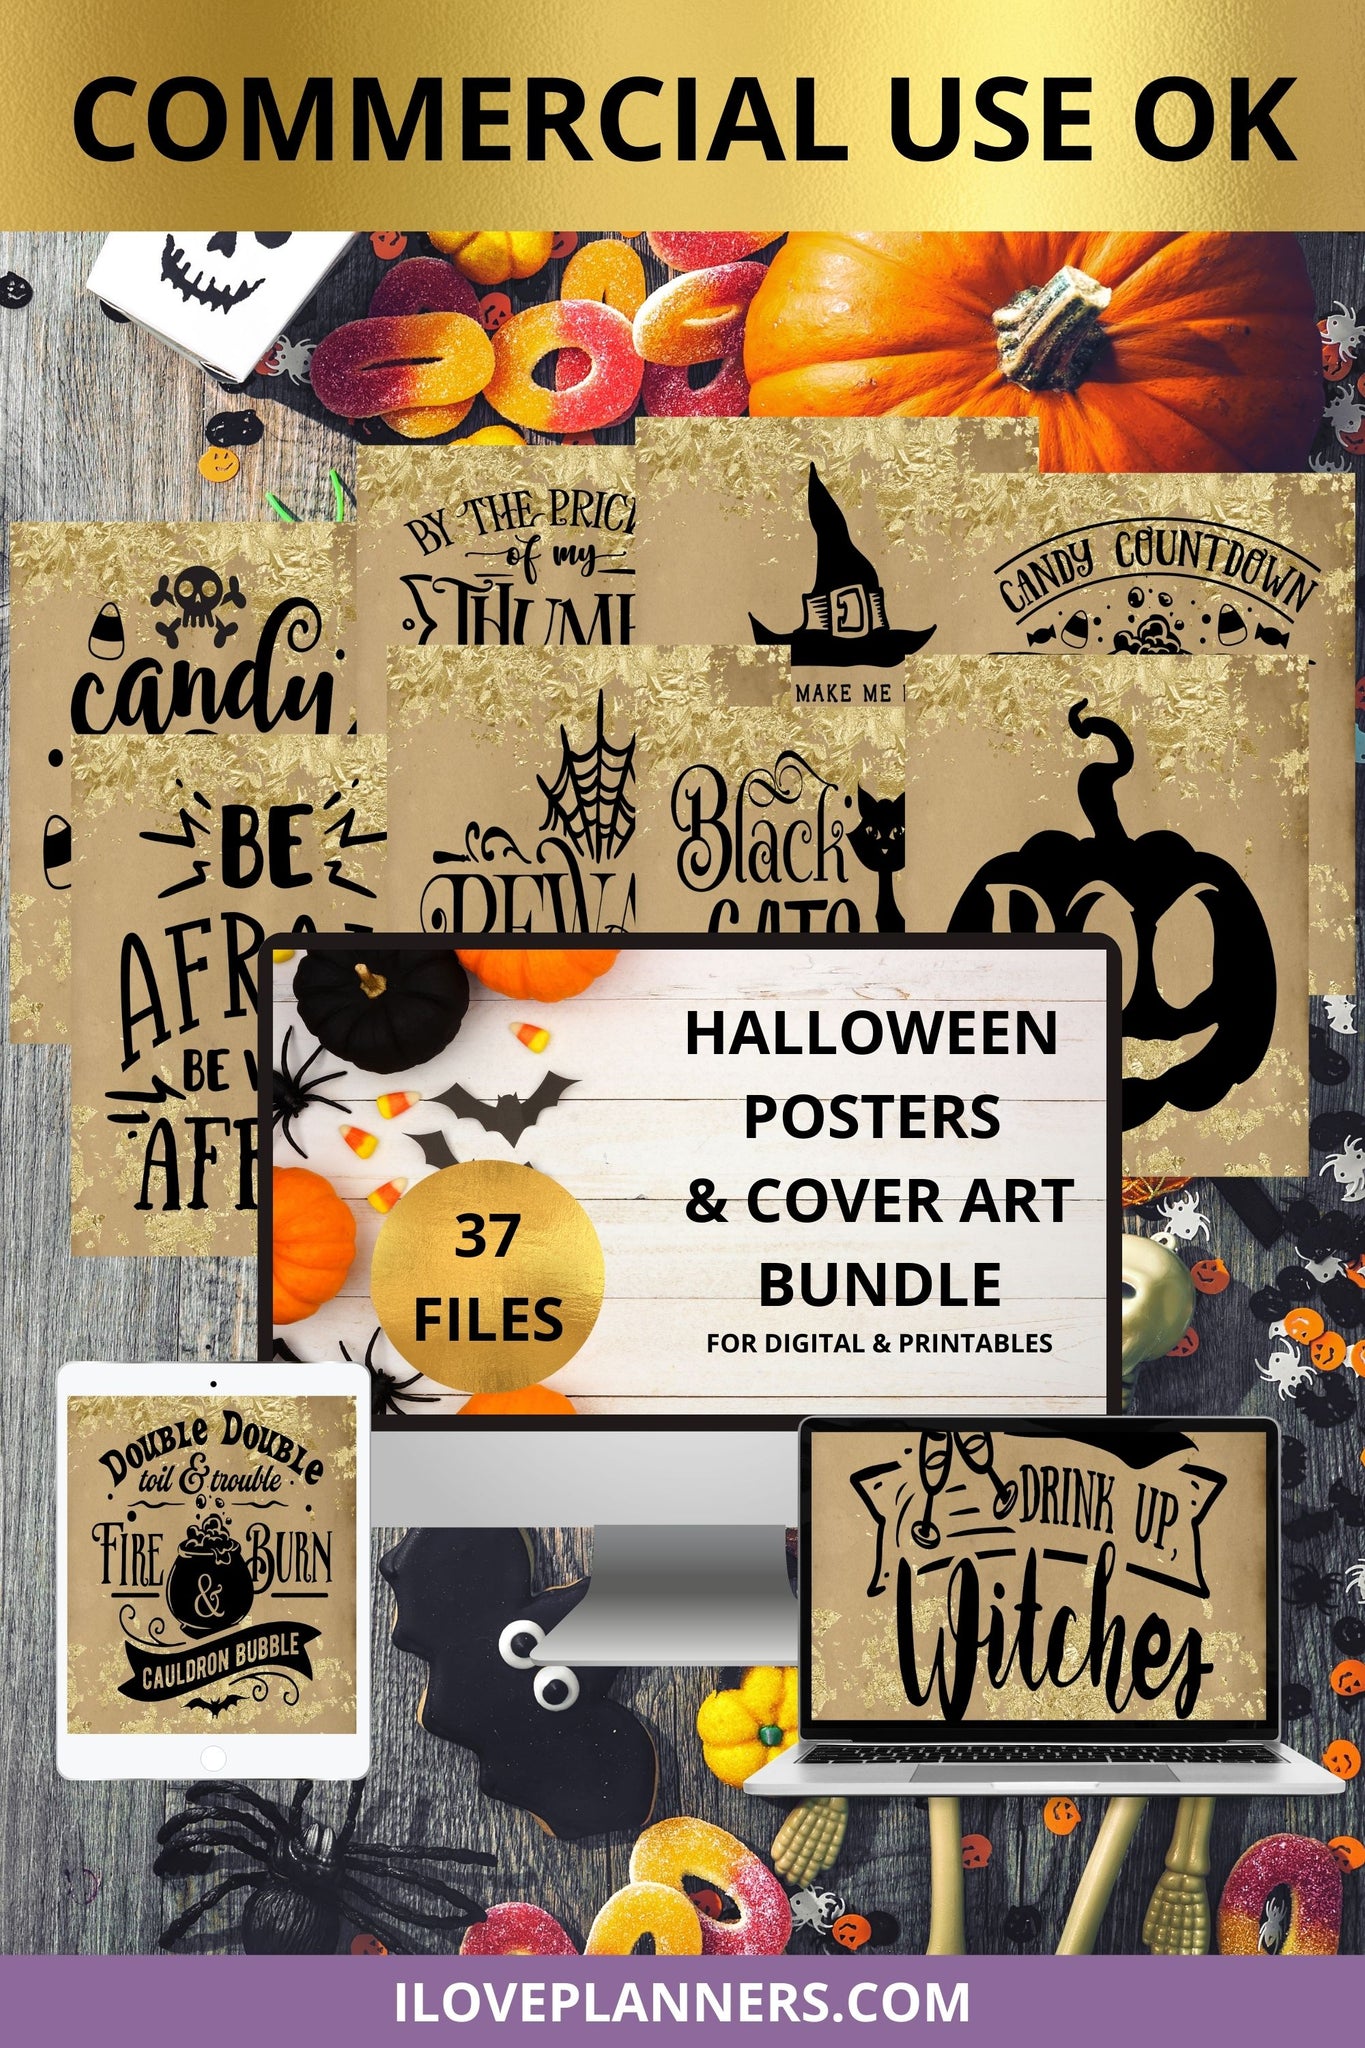 Halloween Vintage Party Posters/ Printable Poster/ DIY Party/ Digital Download/ Instant Download